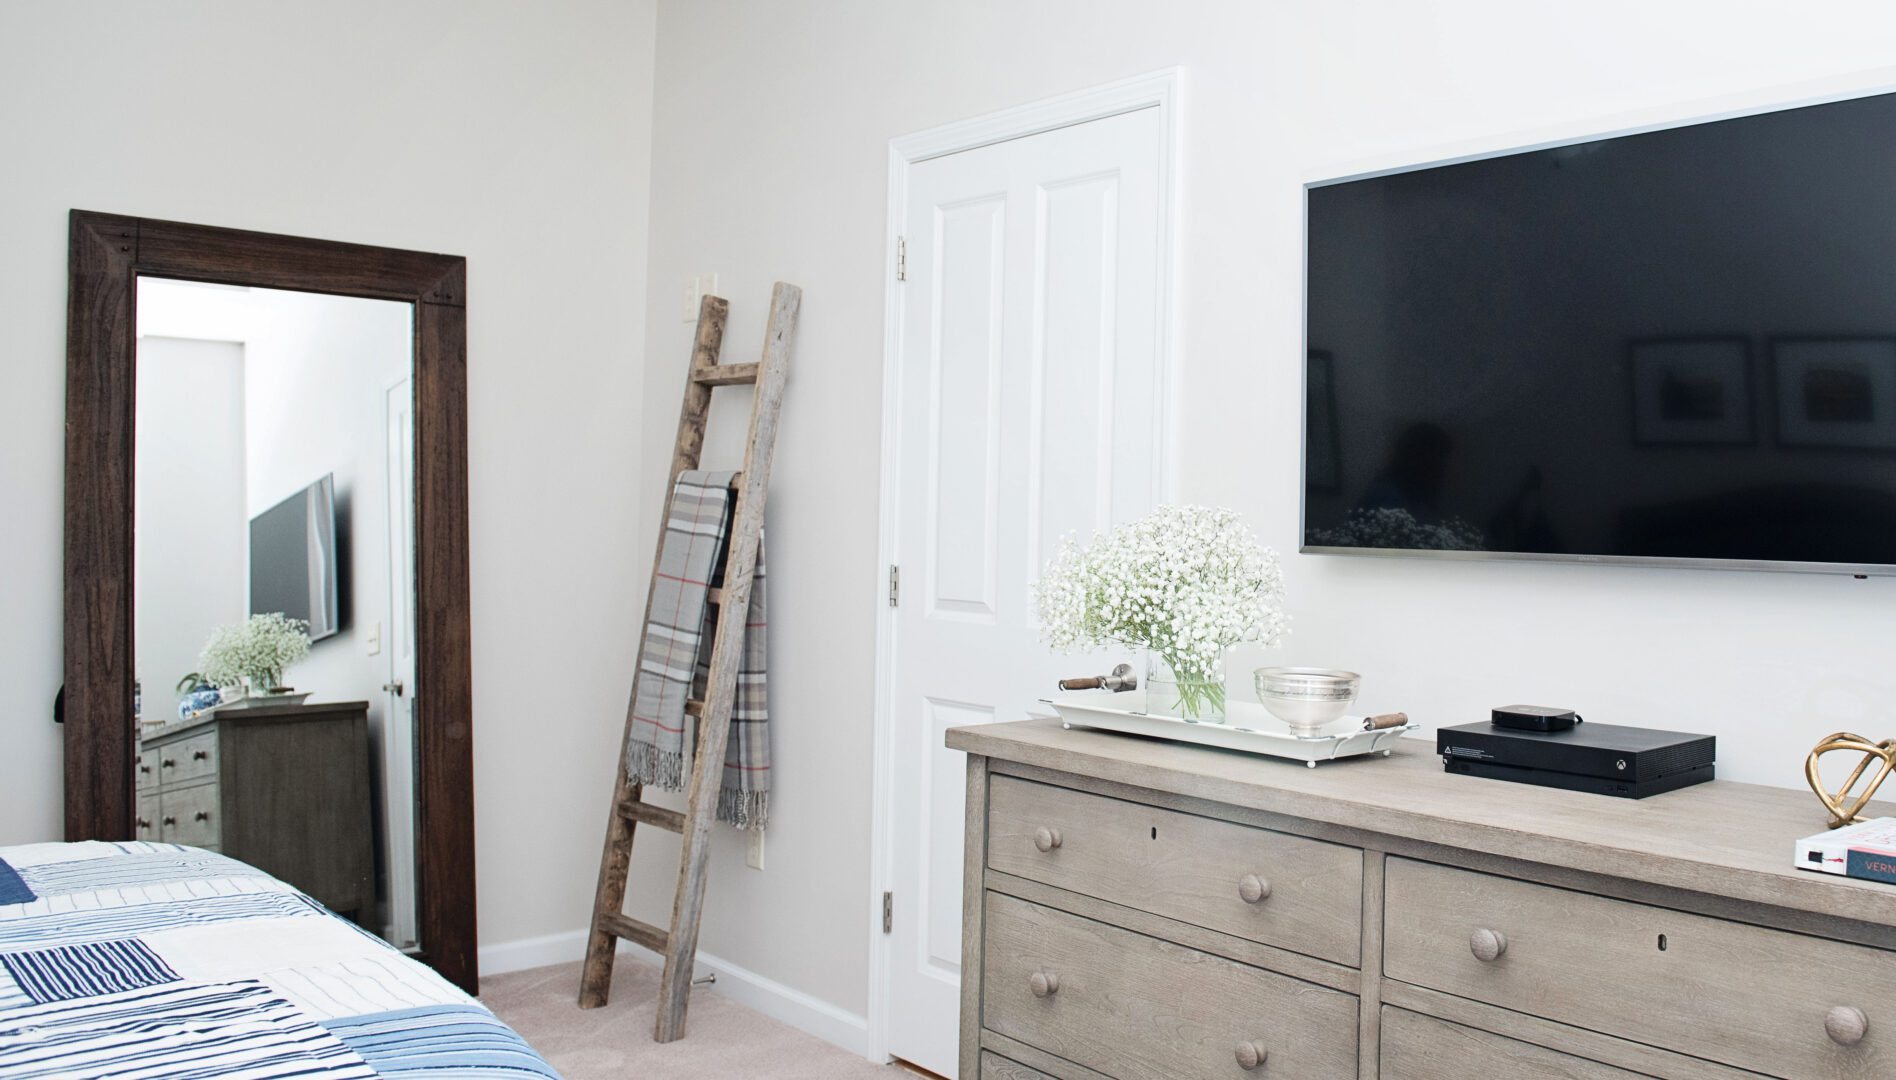 A bedroom with a tv and dresser in it